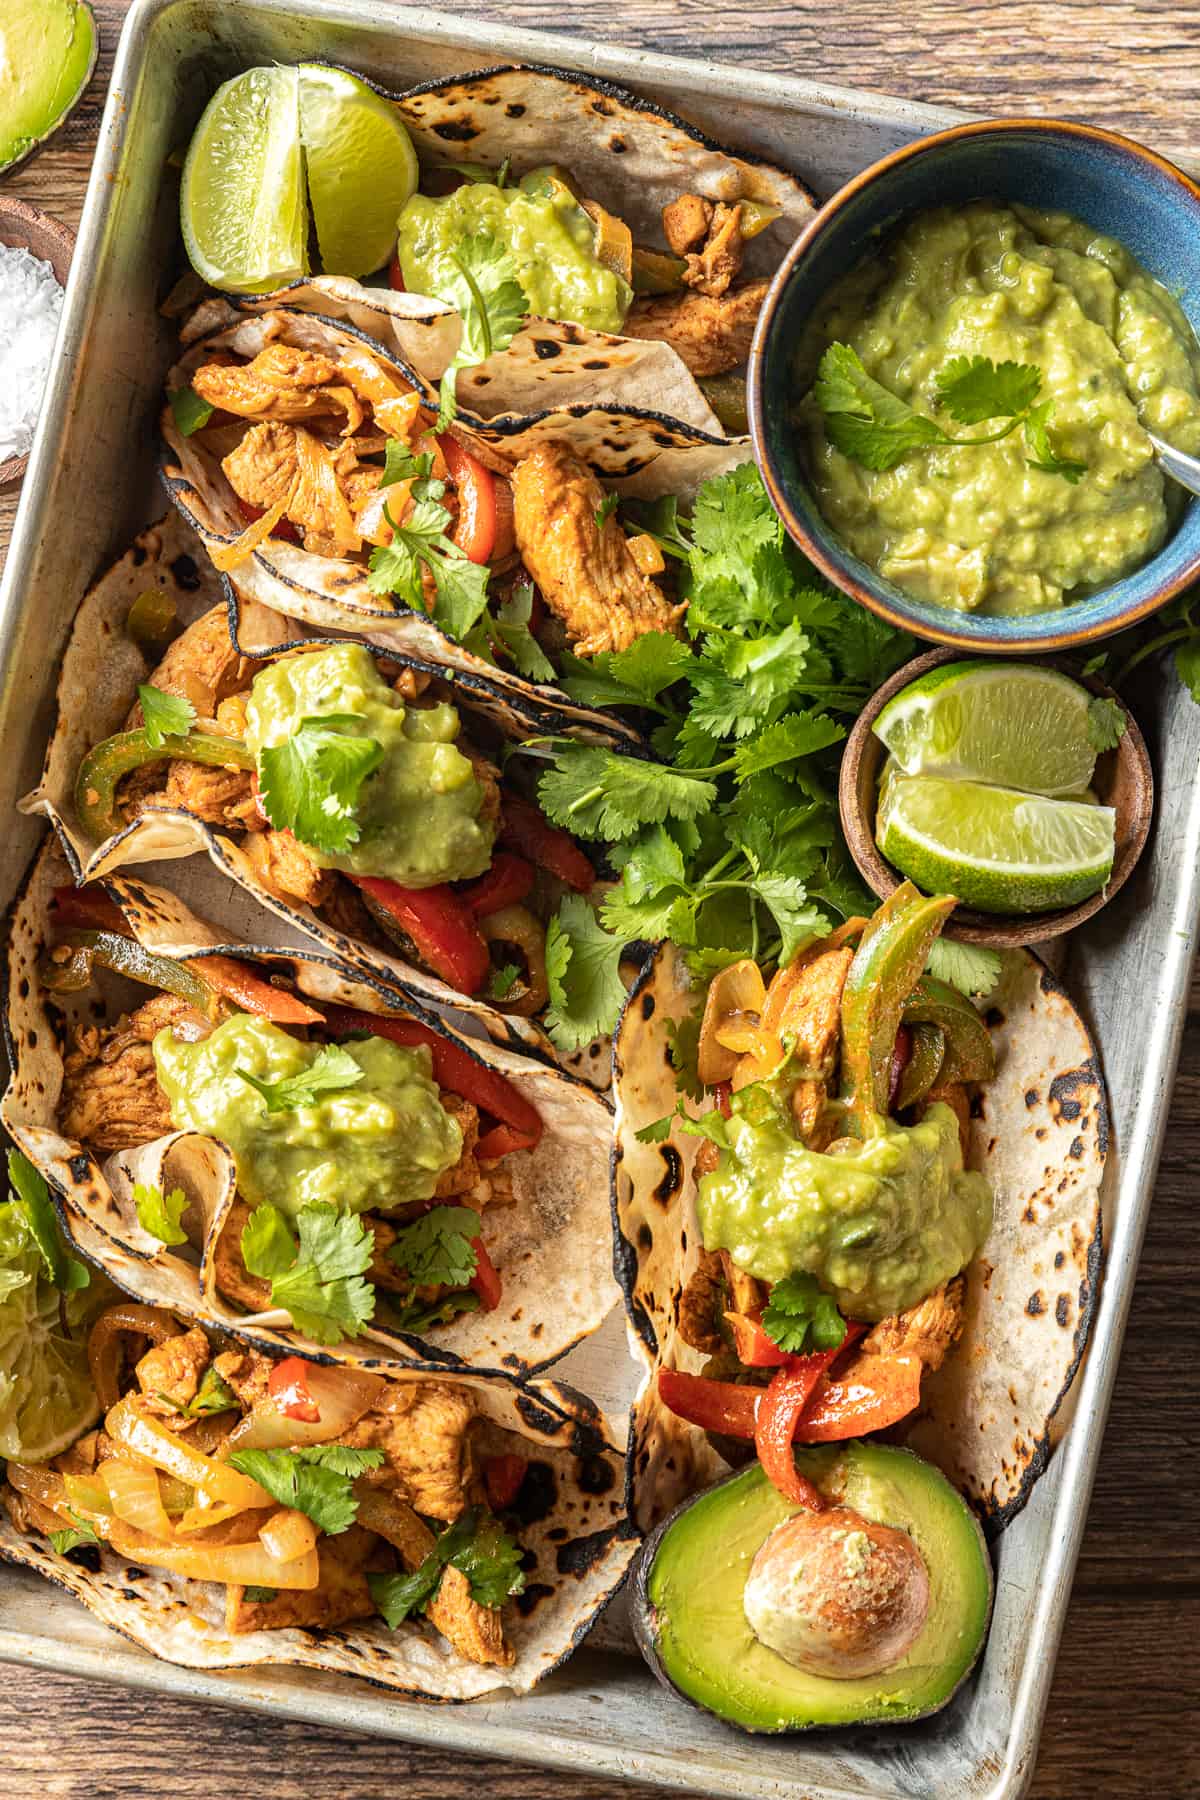 A pan of tacos filled with chicken fajitas and topped with guacamole, cilantro, and lime wedges